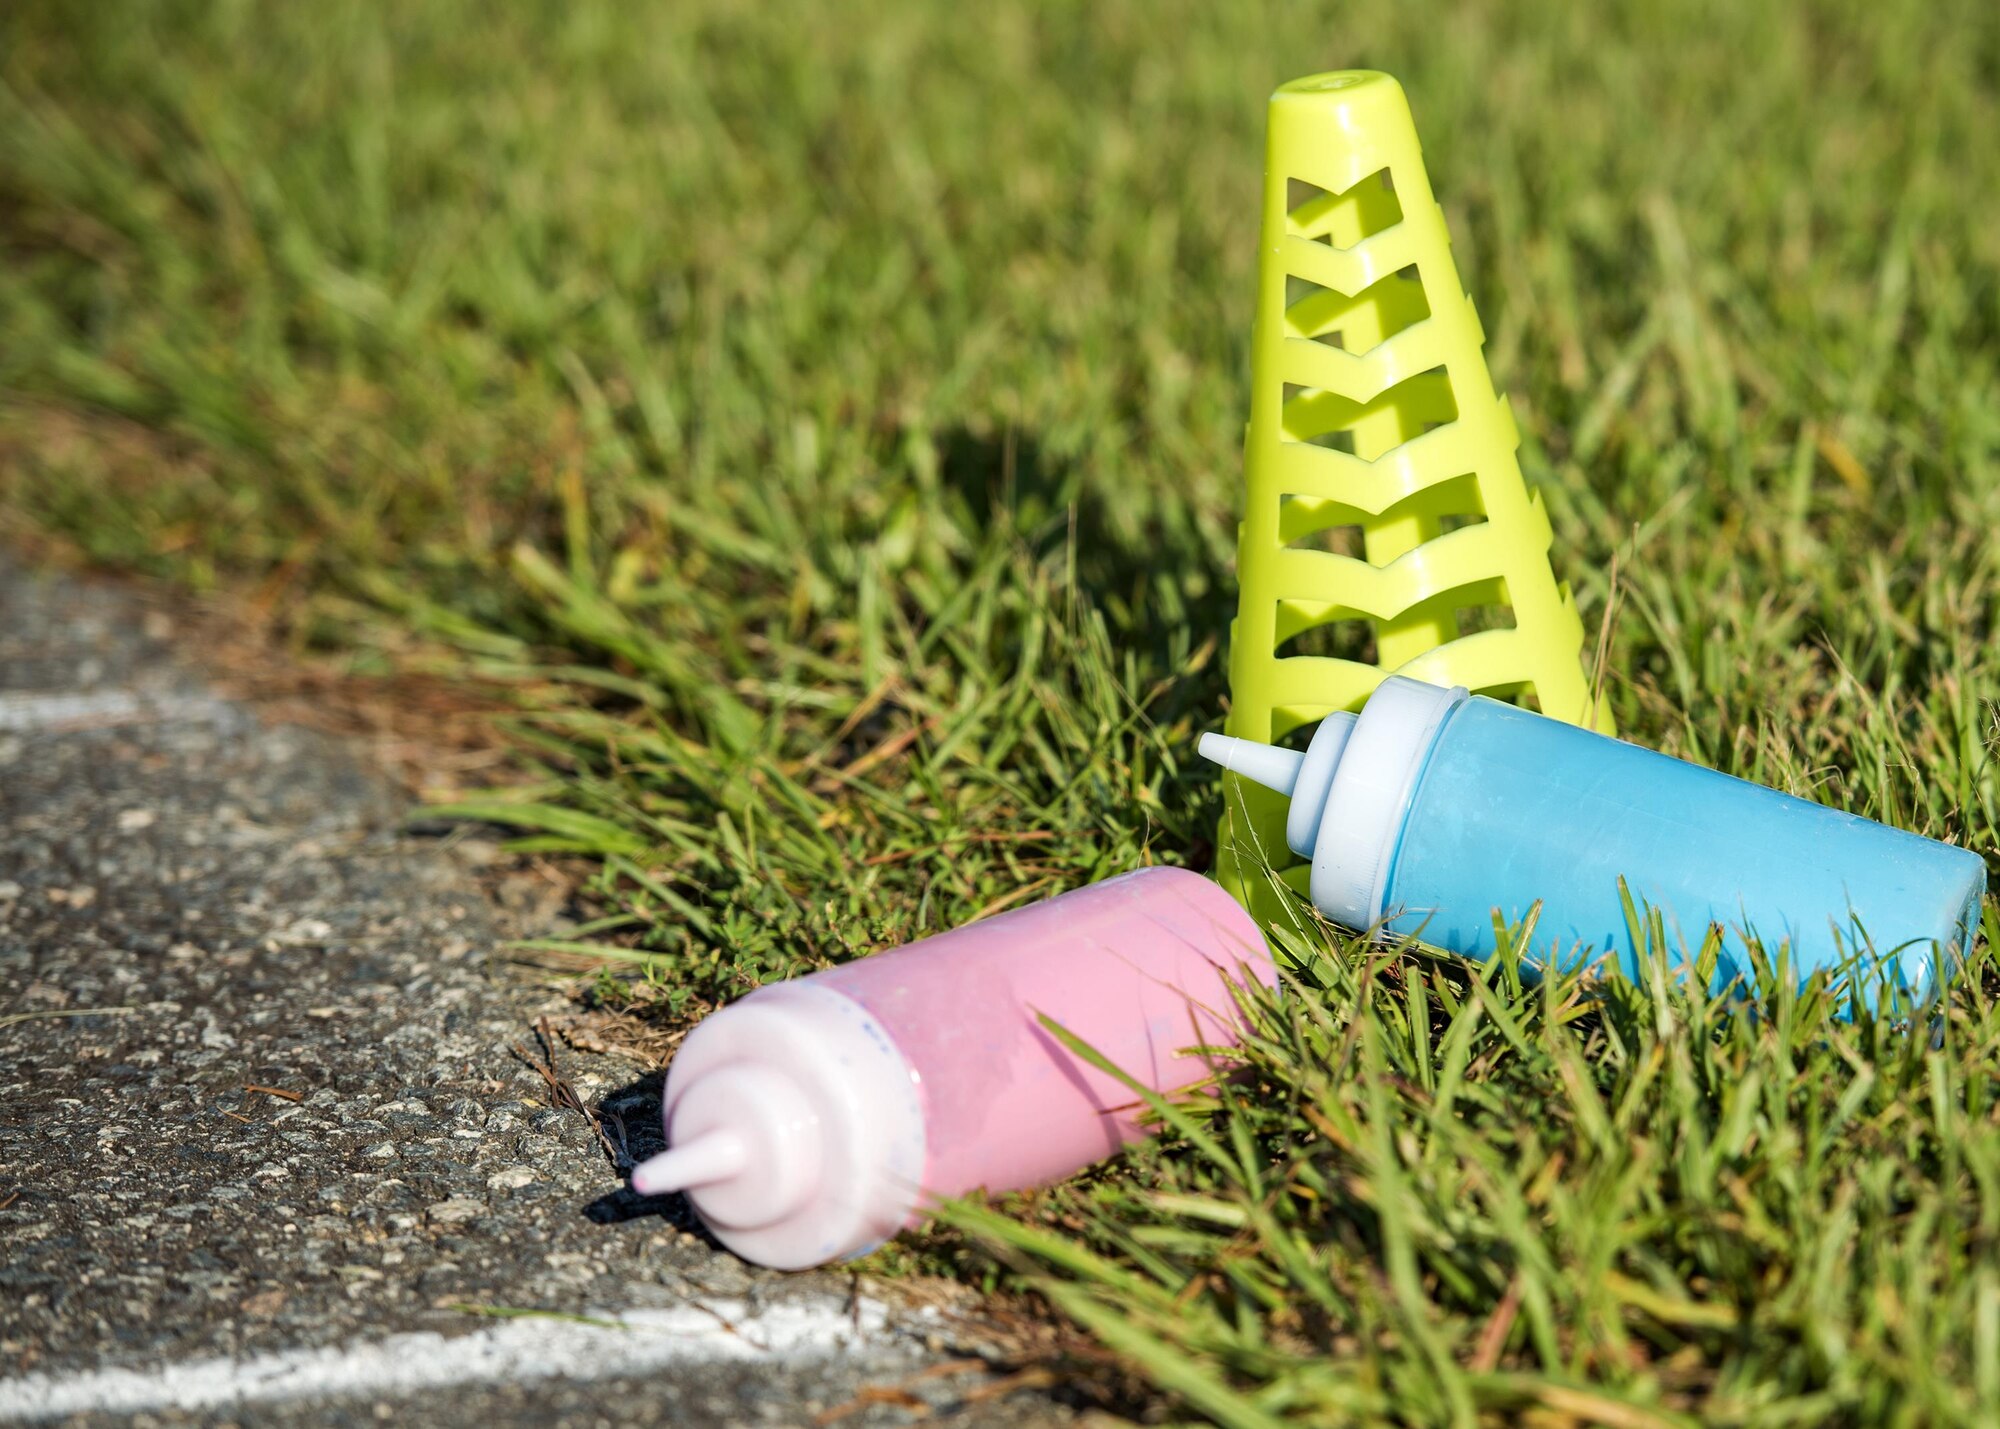 Chalk dispensers rest on the ground during a Kid’s Color Run, Sept. 10, 2016, at Moody Air Force Base, Ga. Participants were colored with scented chalk as they ran through various ‘splash zones’. (U.S. Air Force photo by Airman 1st Class Janiqua P. Robinson)